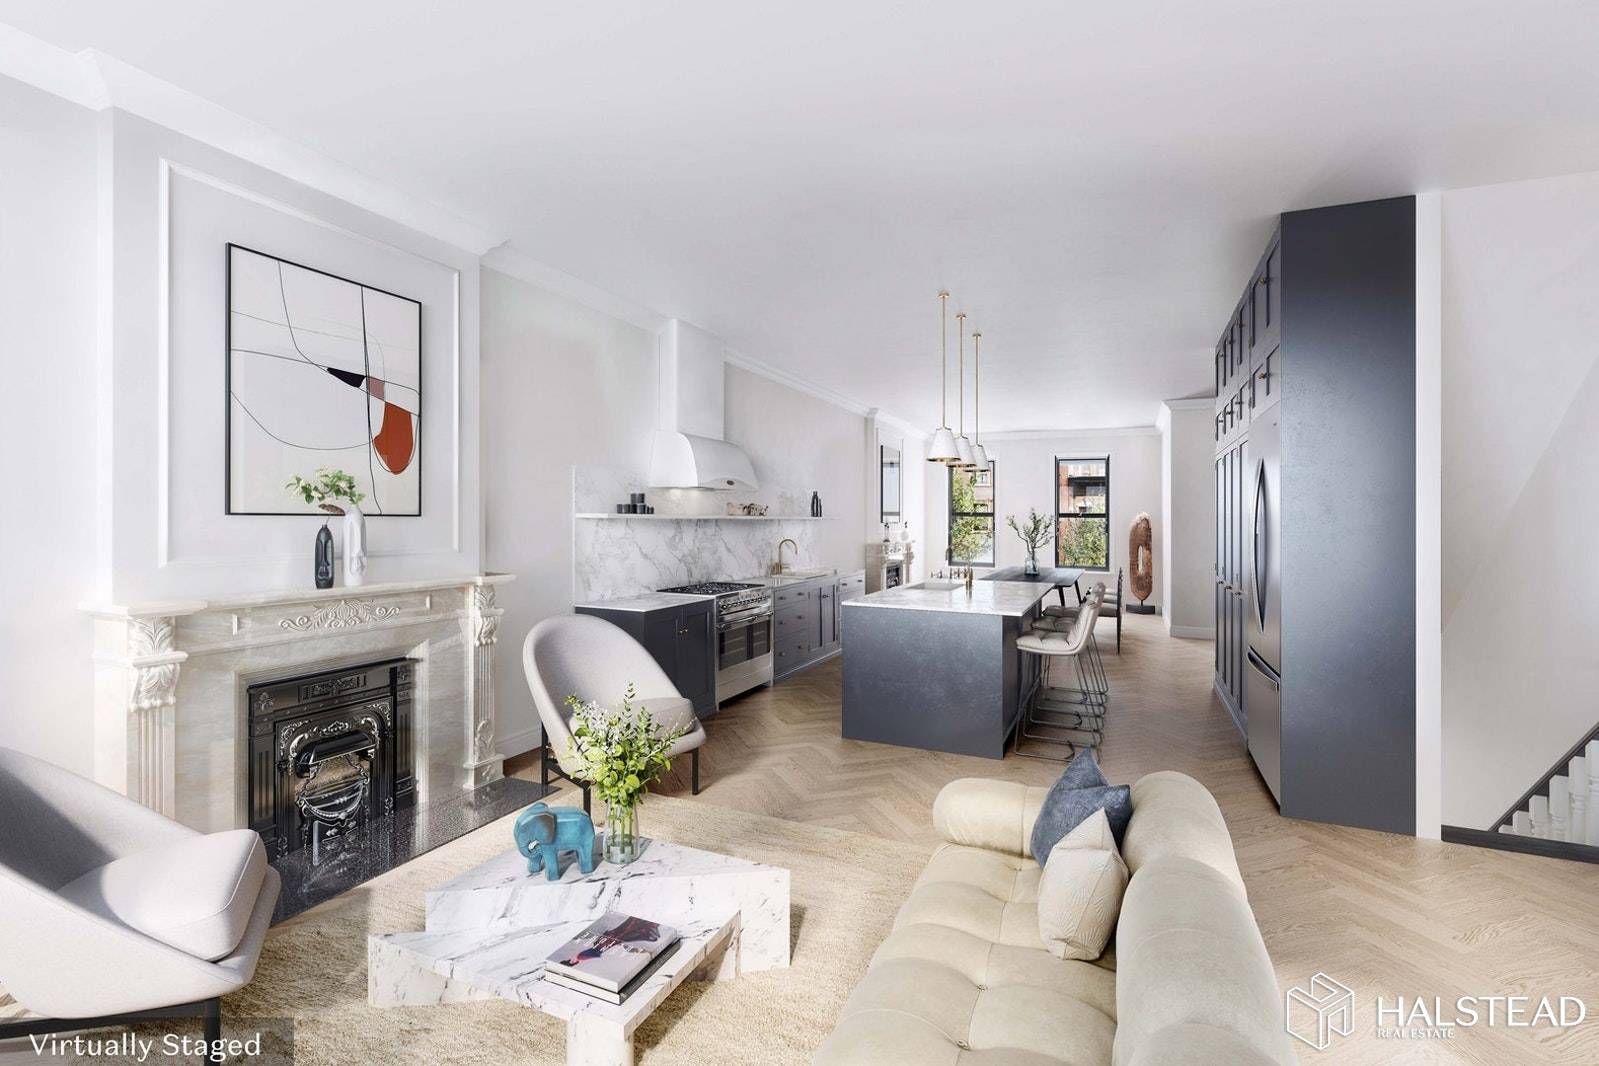 Located in Gramercy Park on a gorgeous townhouse block around the corner from Stuyvesant Square Park, 325 East 18th Street presents a blank canvas and unique opportunity to customize your ...